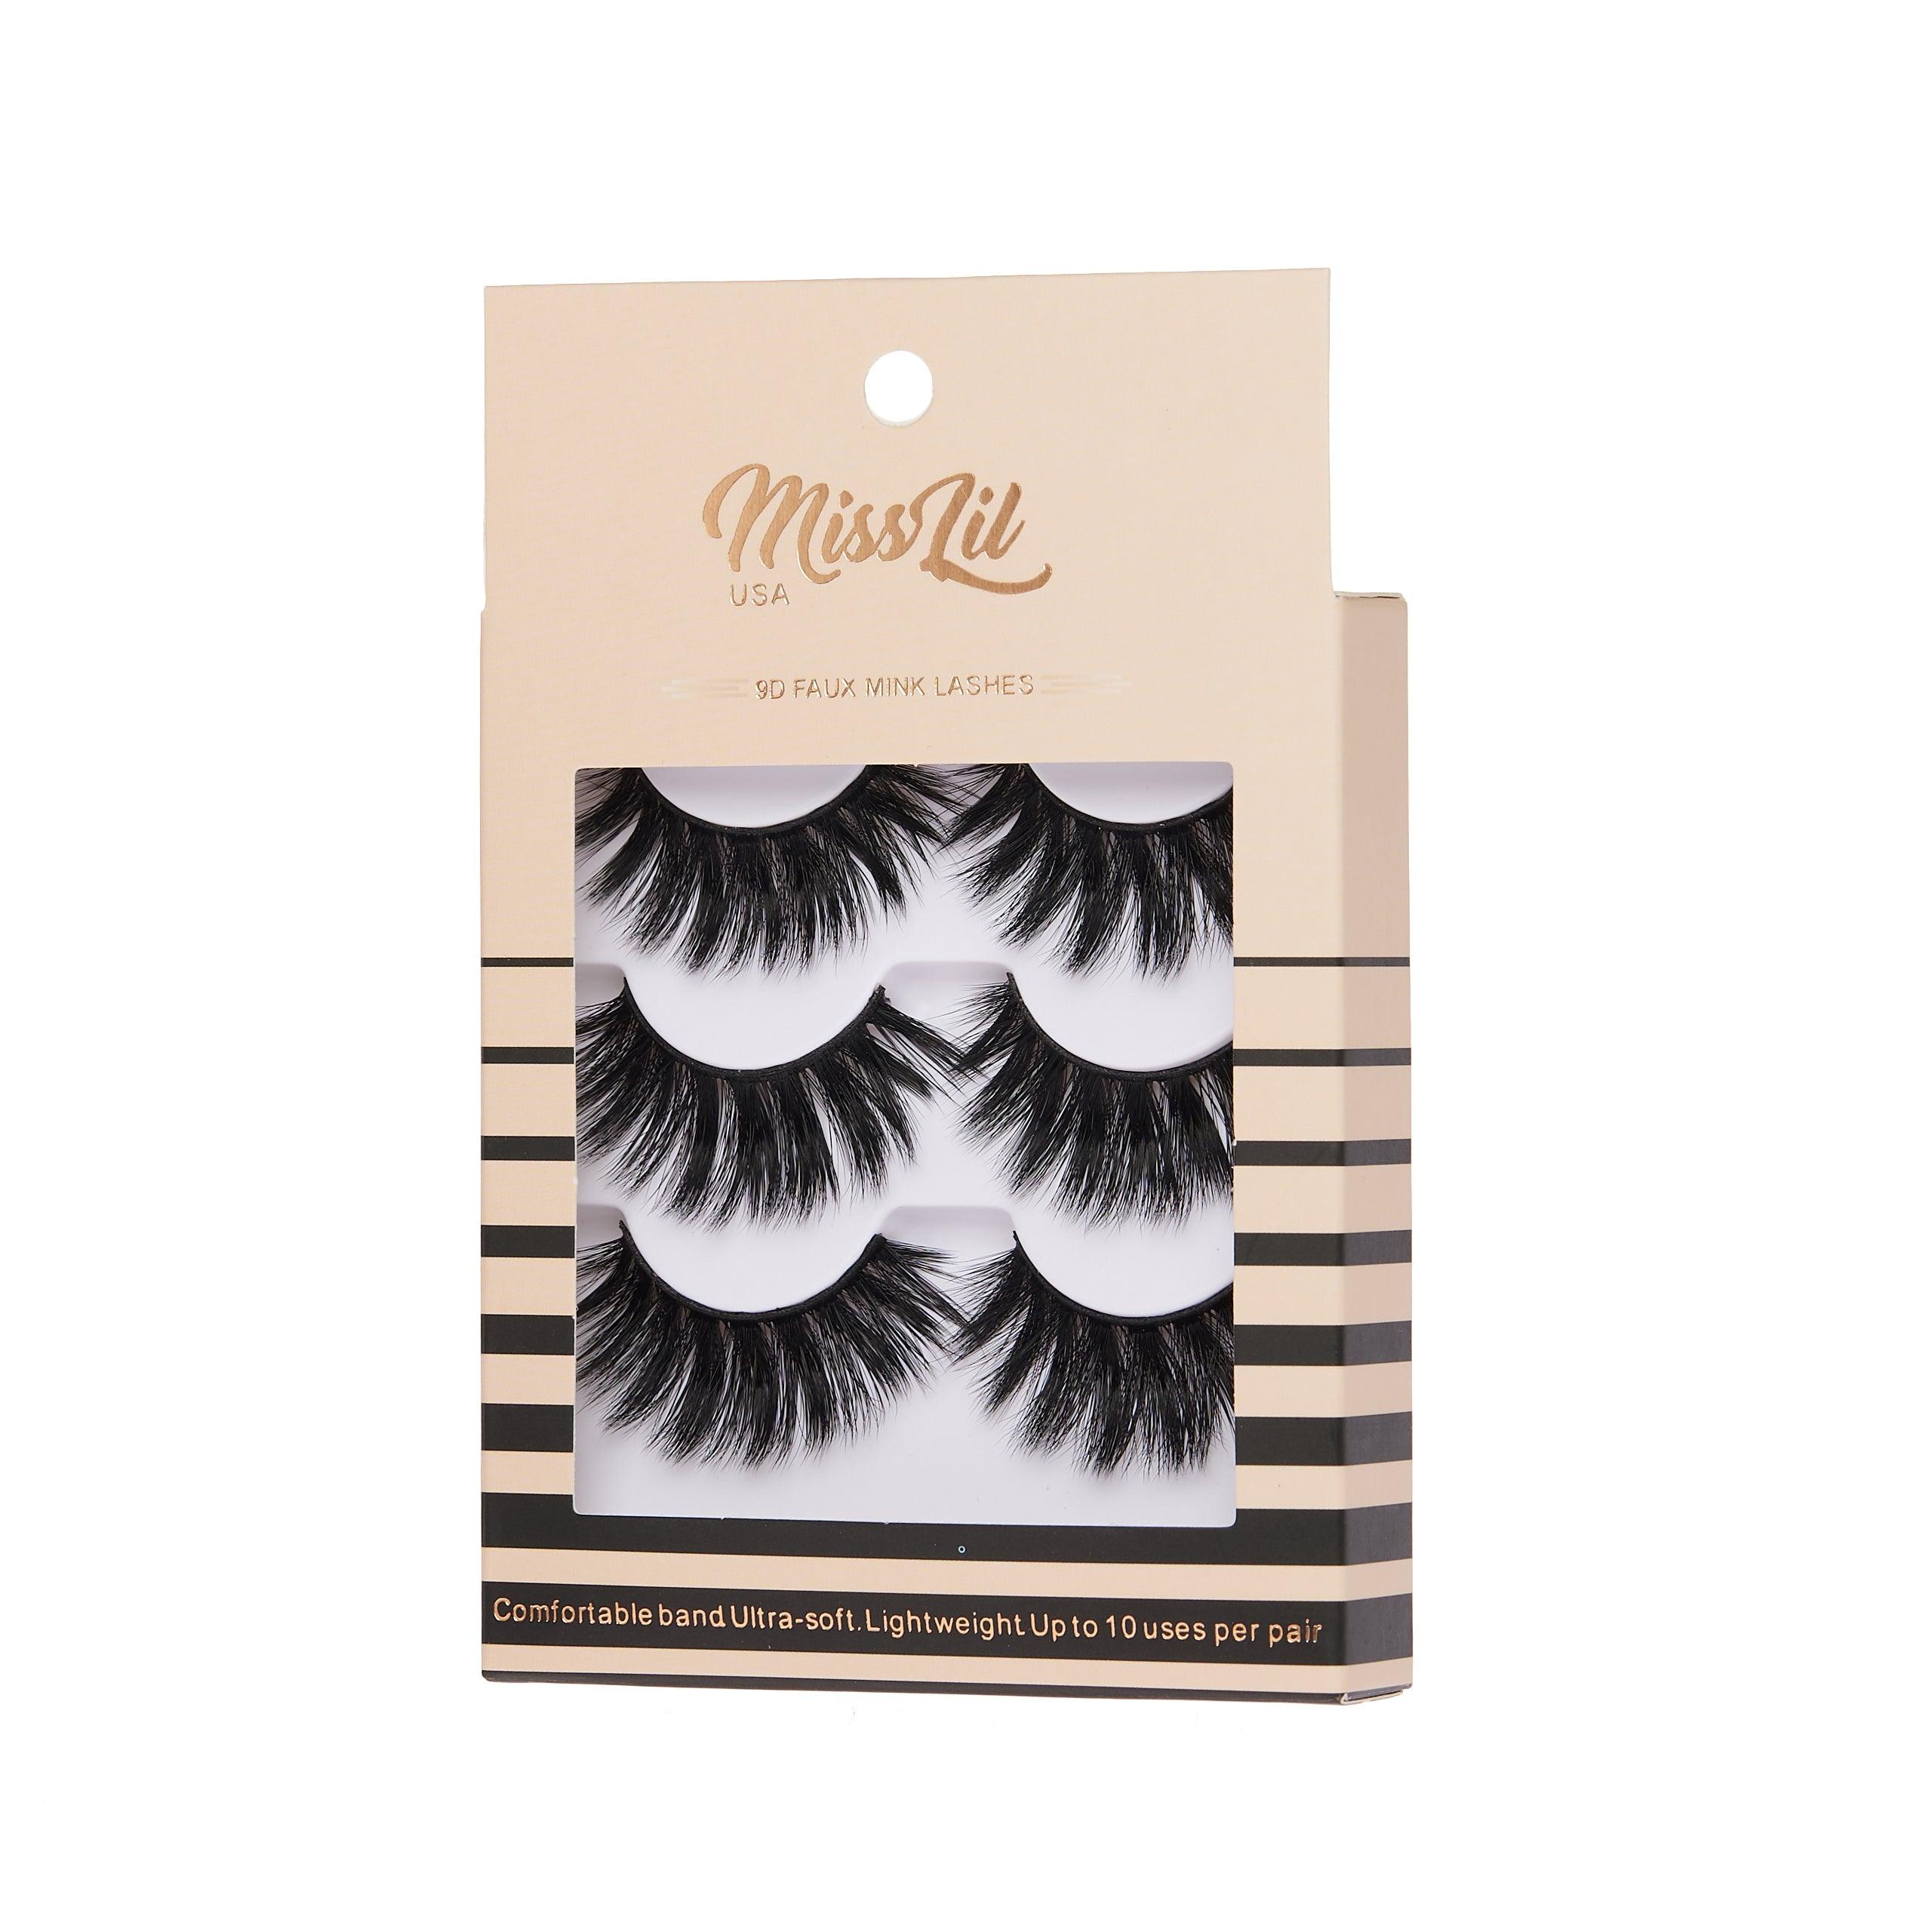 3-Pair Faux 9D Mink Eyelashes - Luxury Collection #4 - Pack of 12 - Miss Lil USA